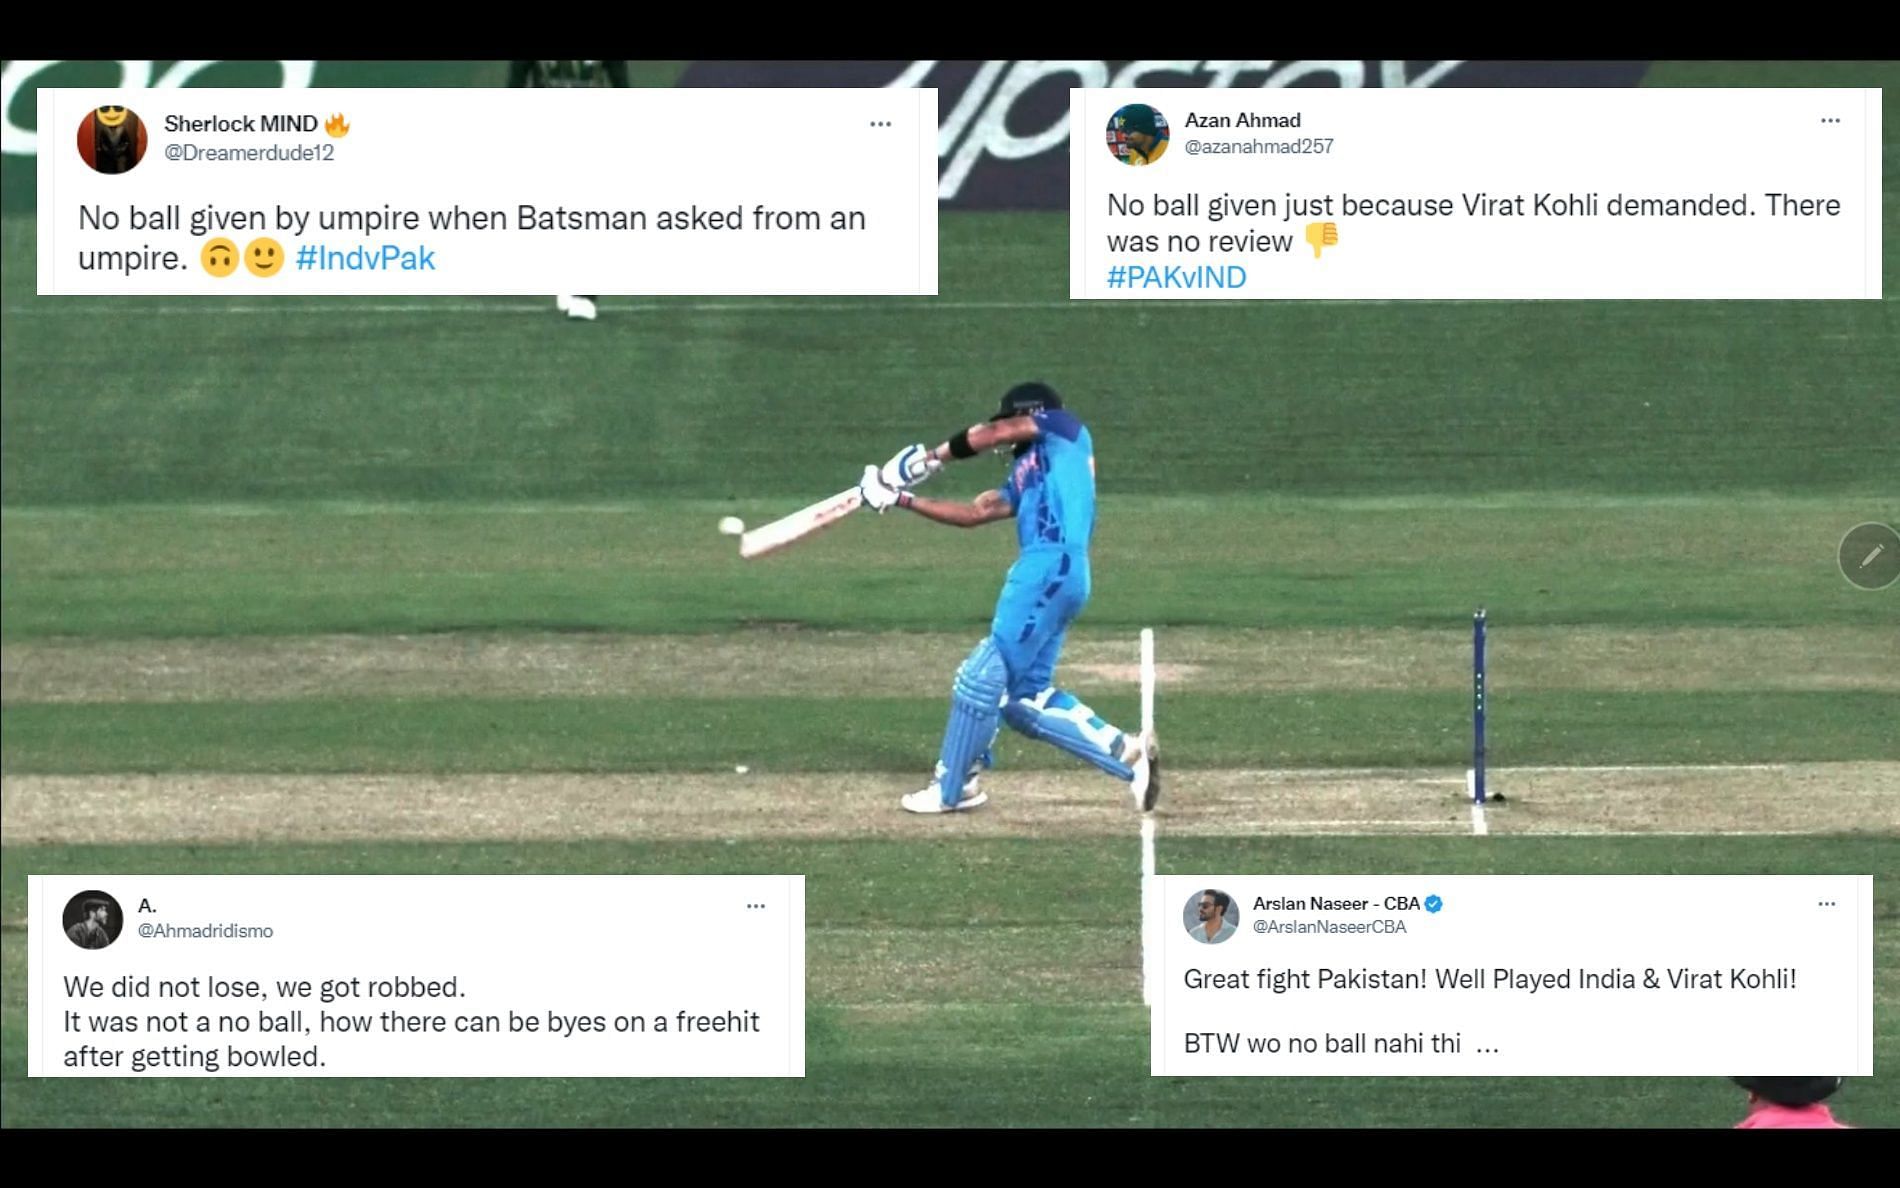 IND vs PAK 2022: “No ball given just because Virat Kohli demanded” - Pakistan fans cry foul over controversial call in MCG cliffhanger